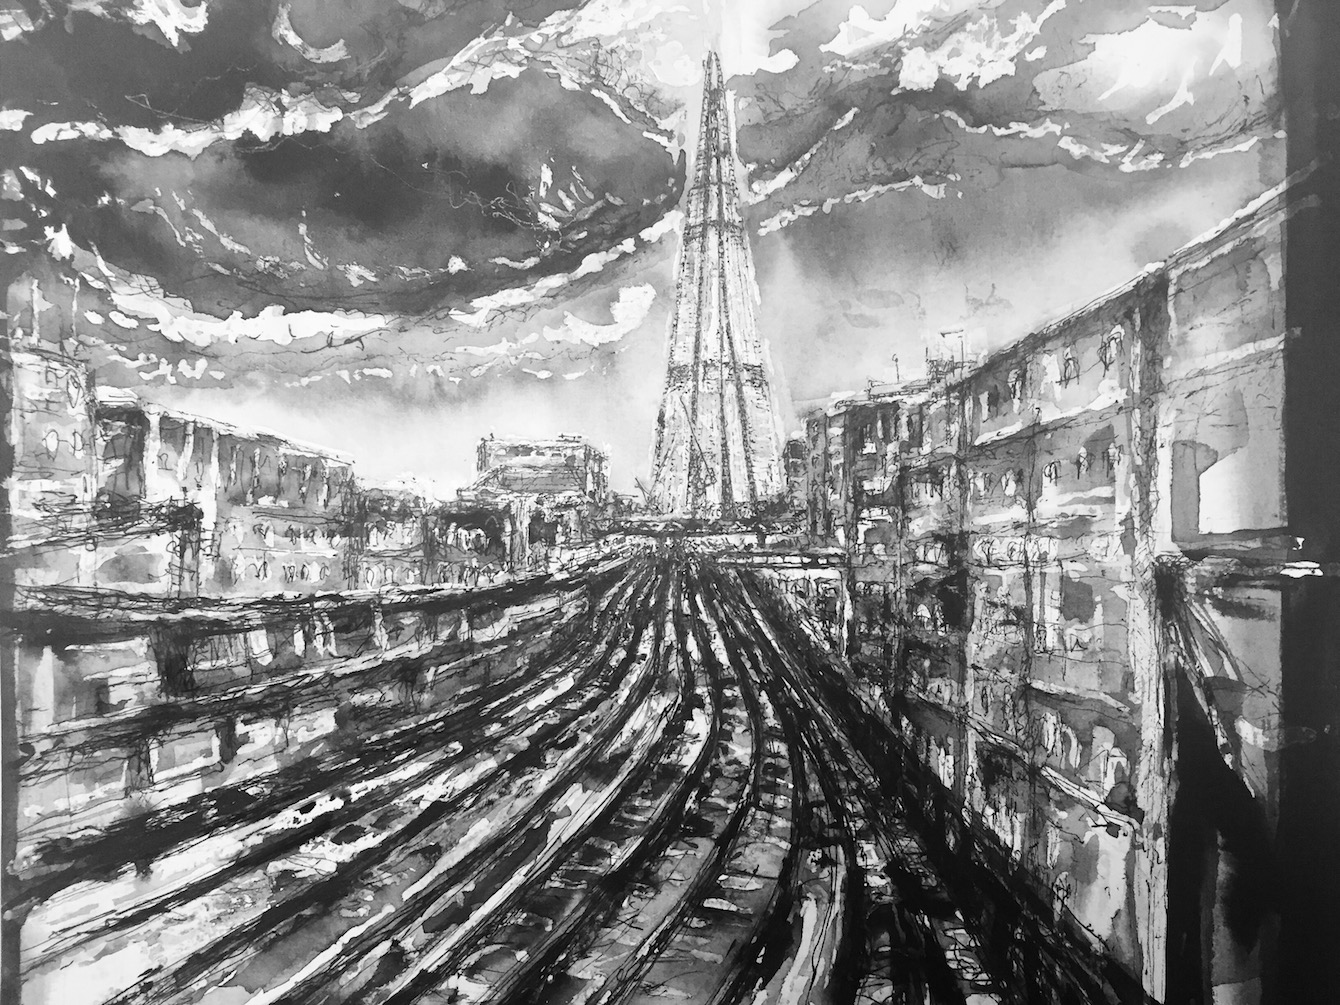  Title: Track V - A Heart of Glass - London Shard Size: 30 x 36 cm Medium: ink and pencil on watercolour paper 